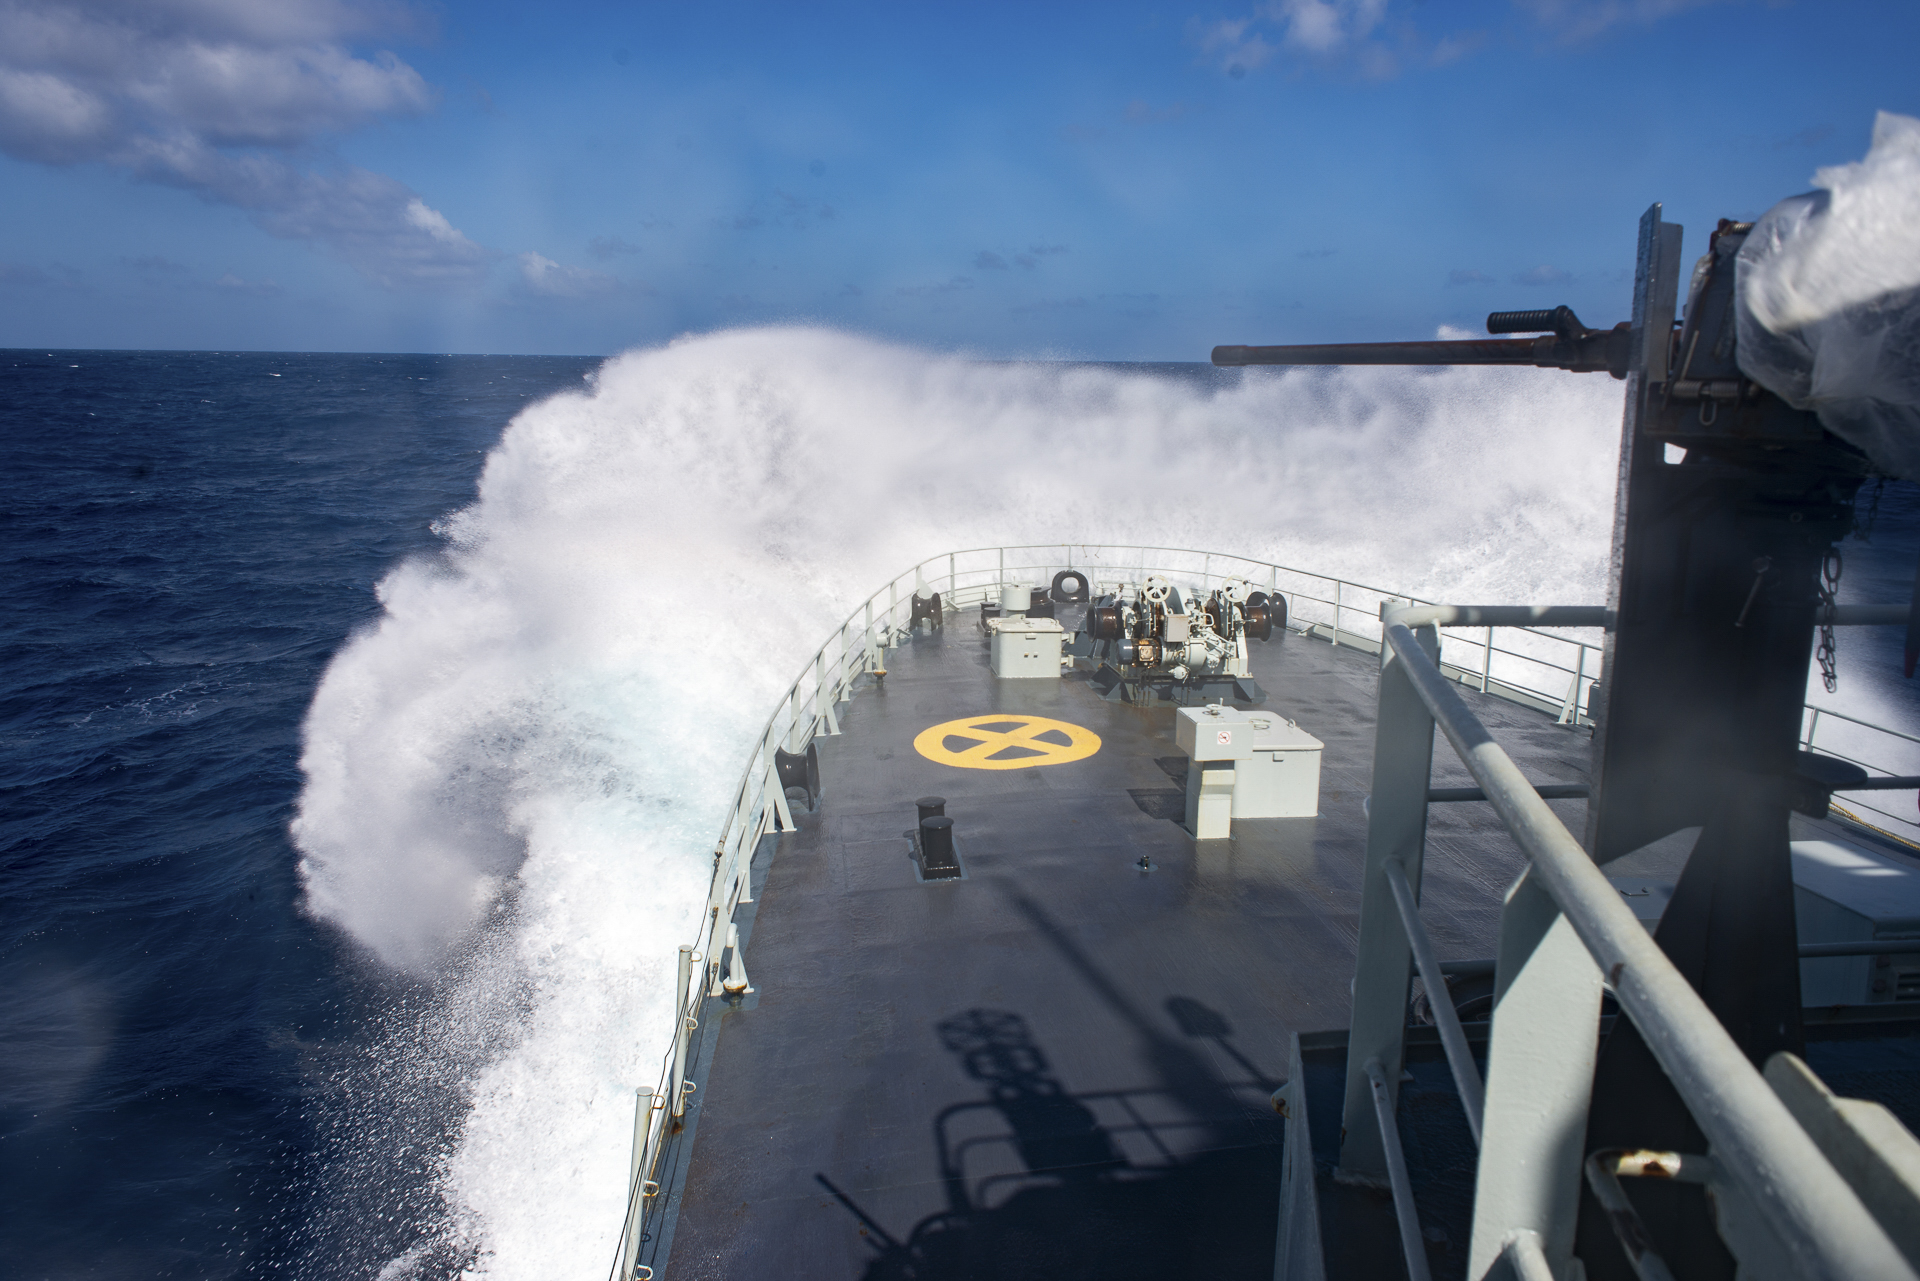 Waves crash against HMCS Nanaimo in the waters of the eastern Pacific Ocean during Operation CARIBBE on March 3, 2020. Photo: Canadian Armed Forces Photo